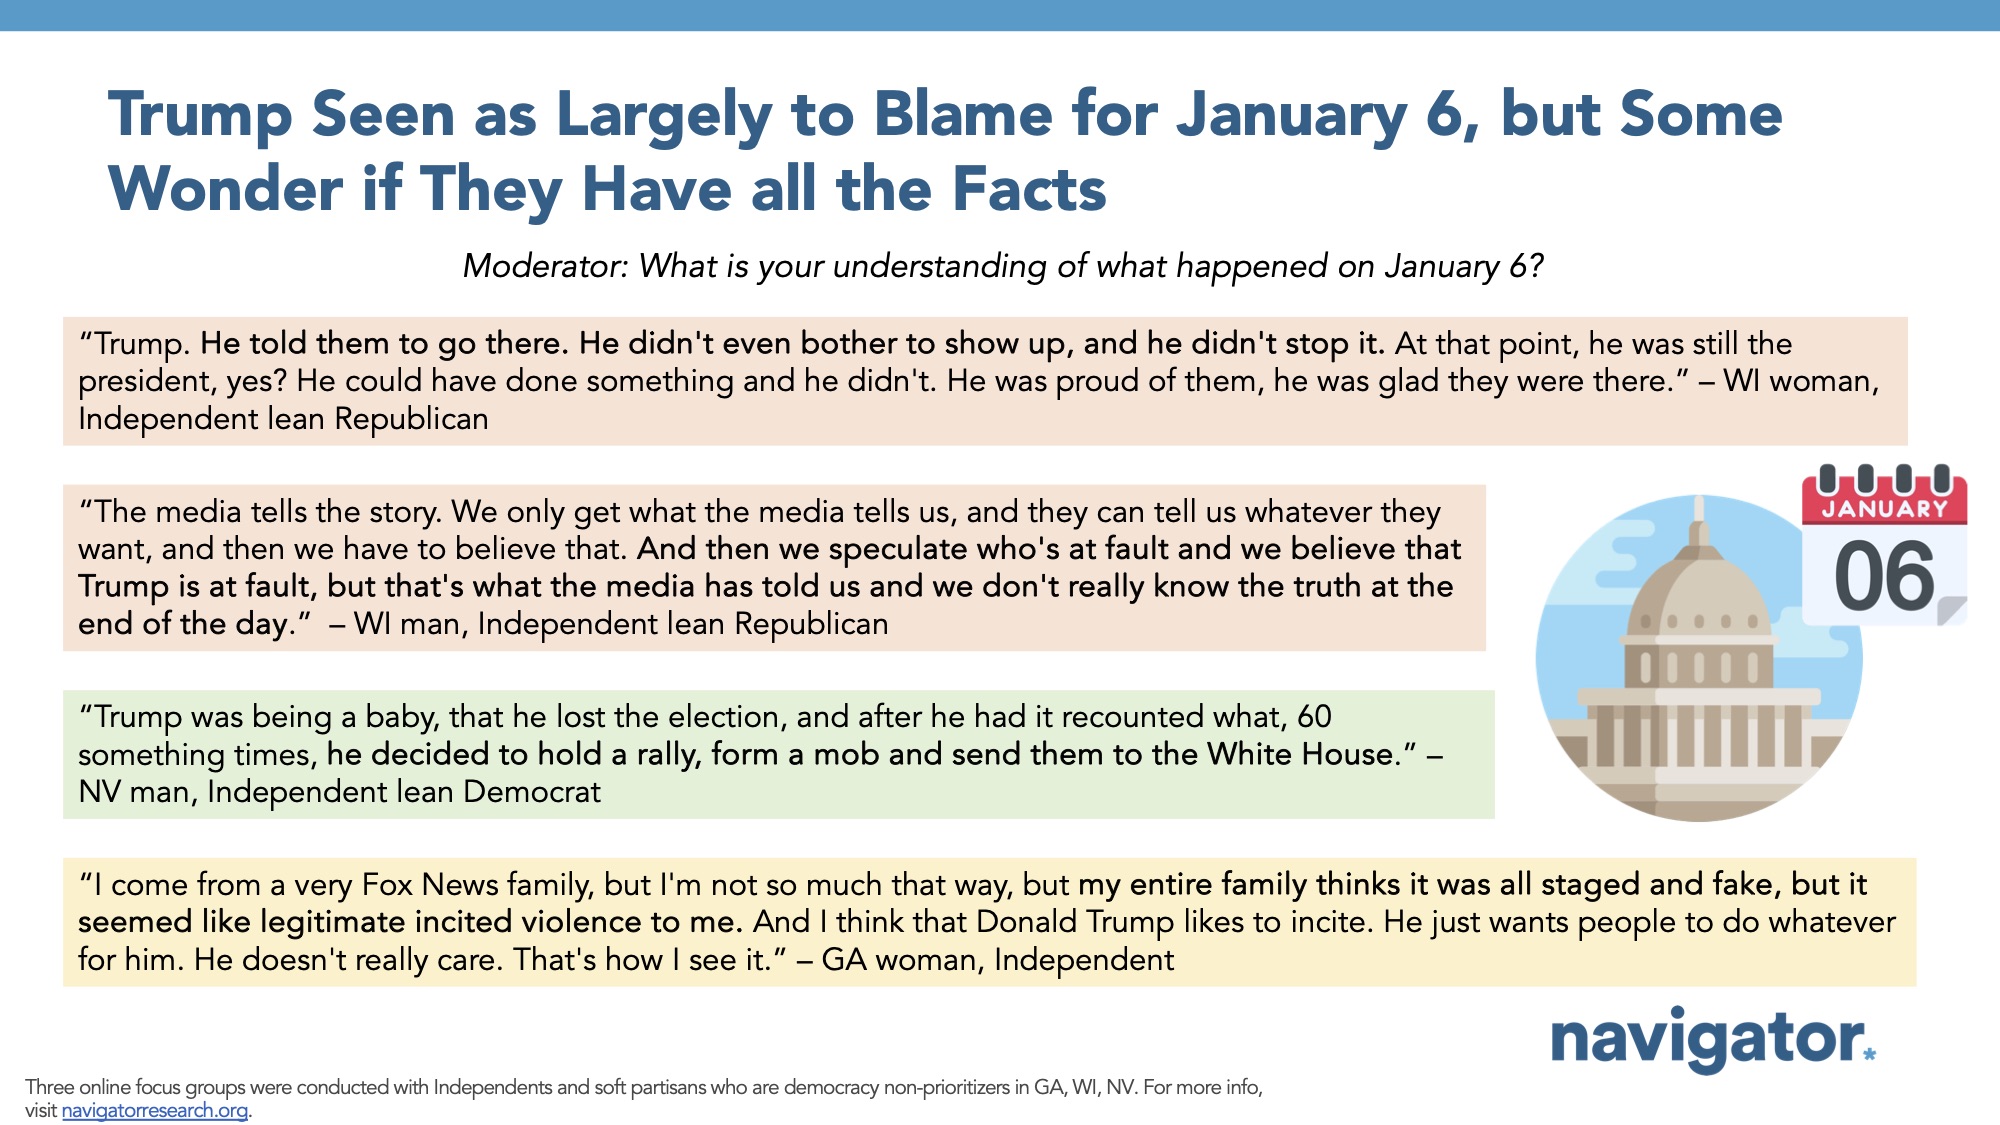 Focus group report slide titled: Trump Seen as Largely to Blame for January 6, but Some Wonder if They Have all the Facts